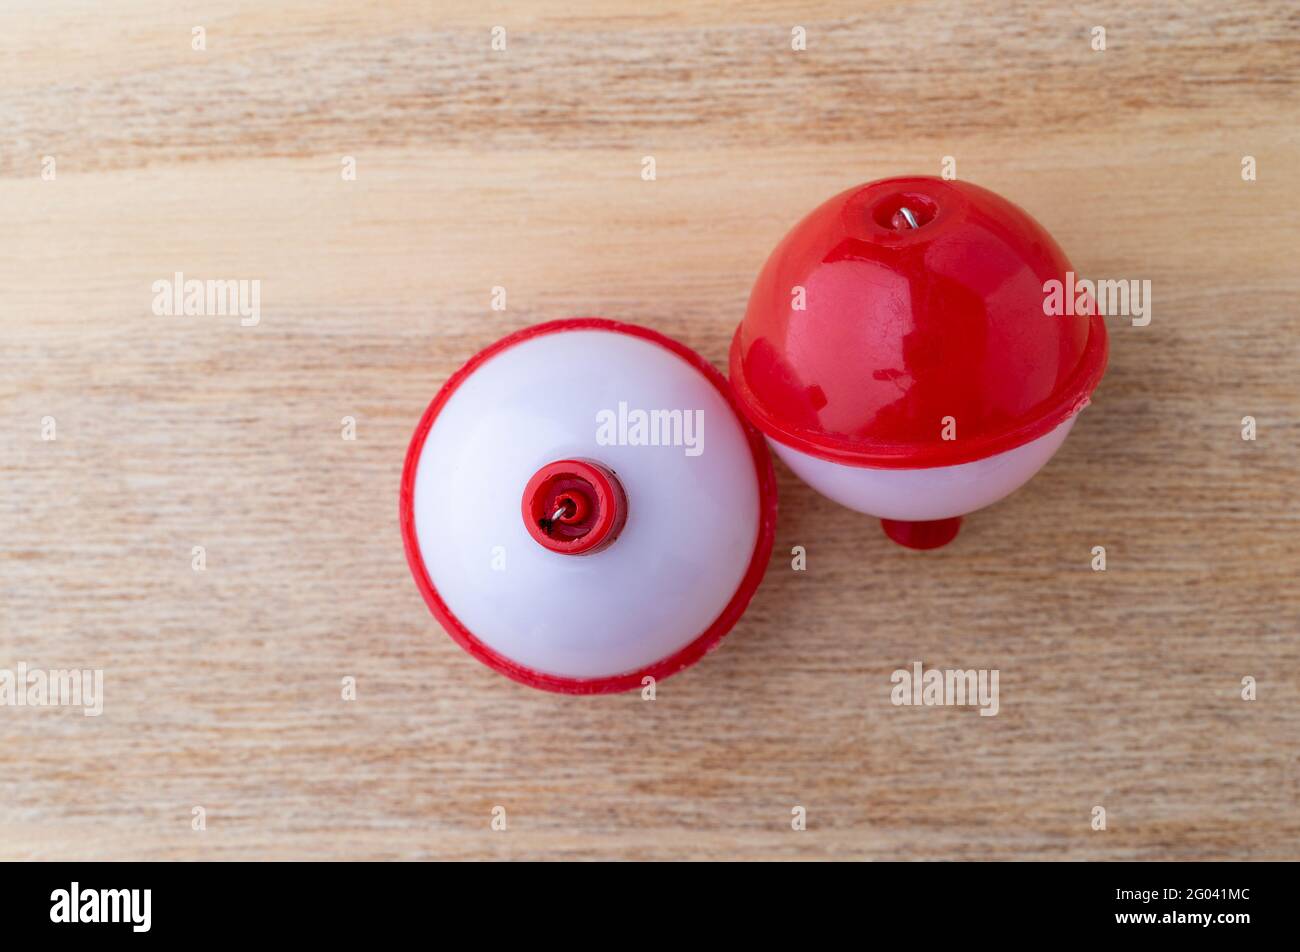 https://c8.alamy.com/comp/2G041MC/top-view-of-two-red-and-white-plastic-fishing-bobbers-on-a-wood-background-2G041MC.jpg